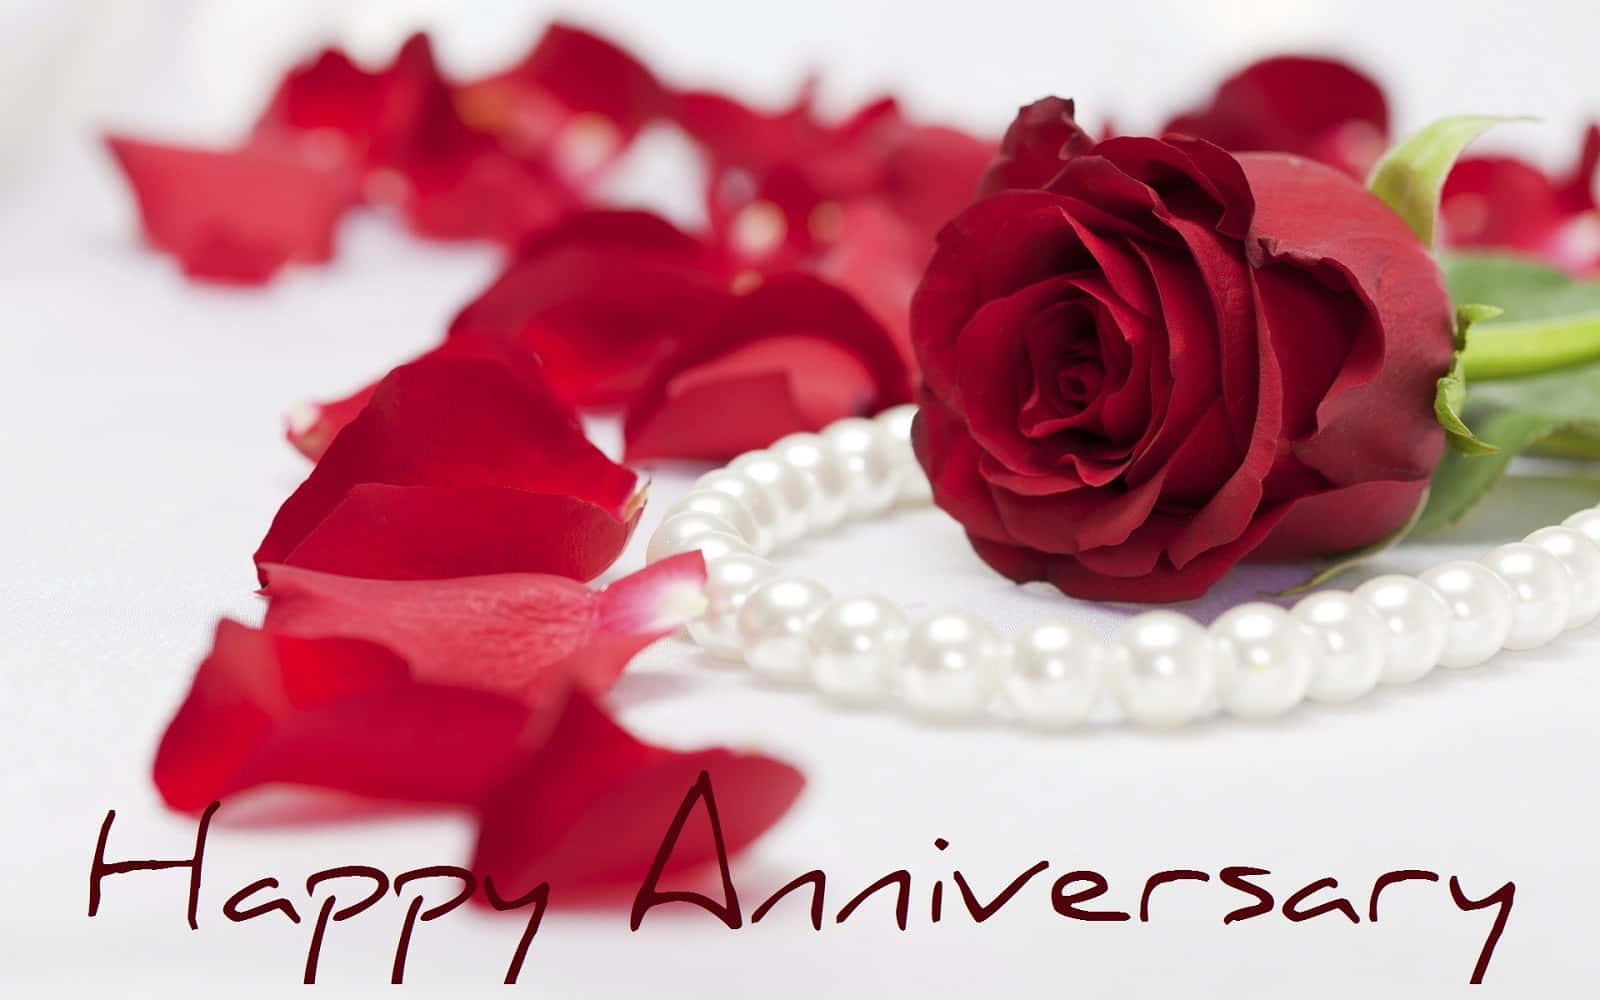 Caption: Elegant Pearl Necklace Adorning A Red Rose On A Romantic Anniversary Background